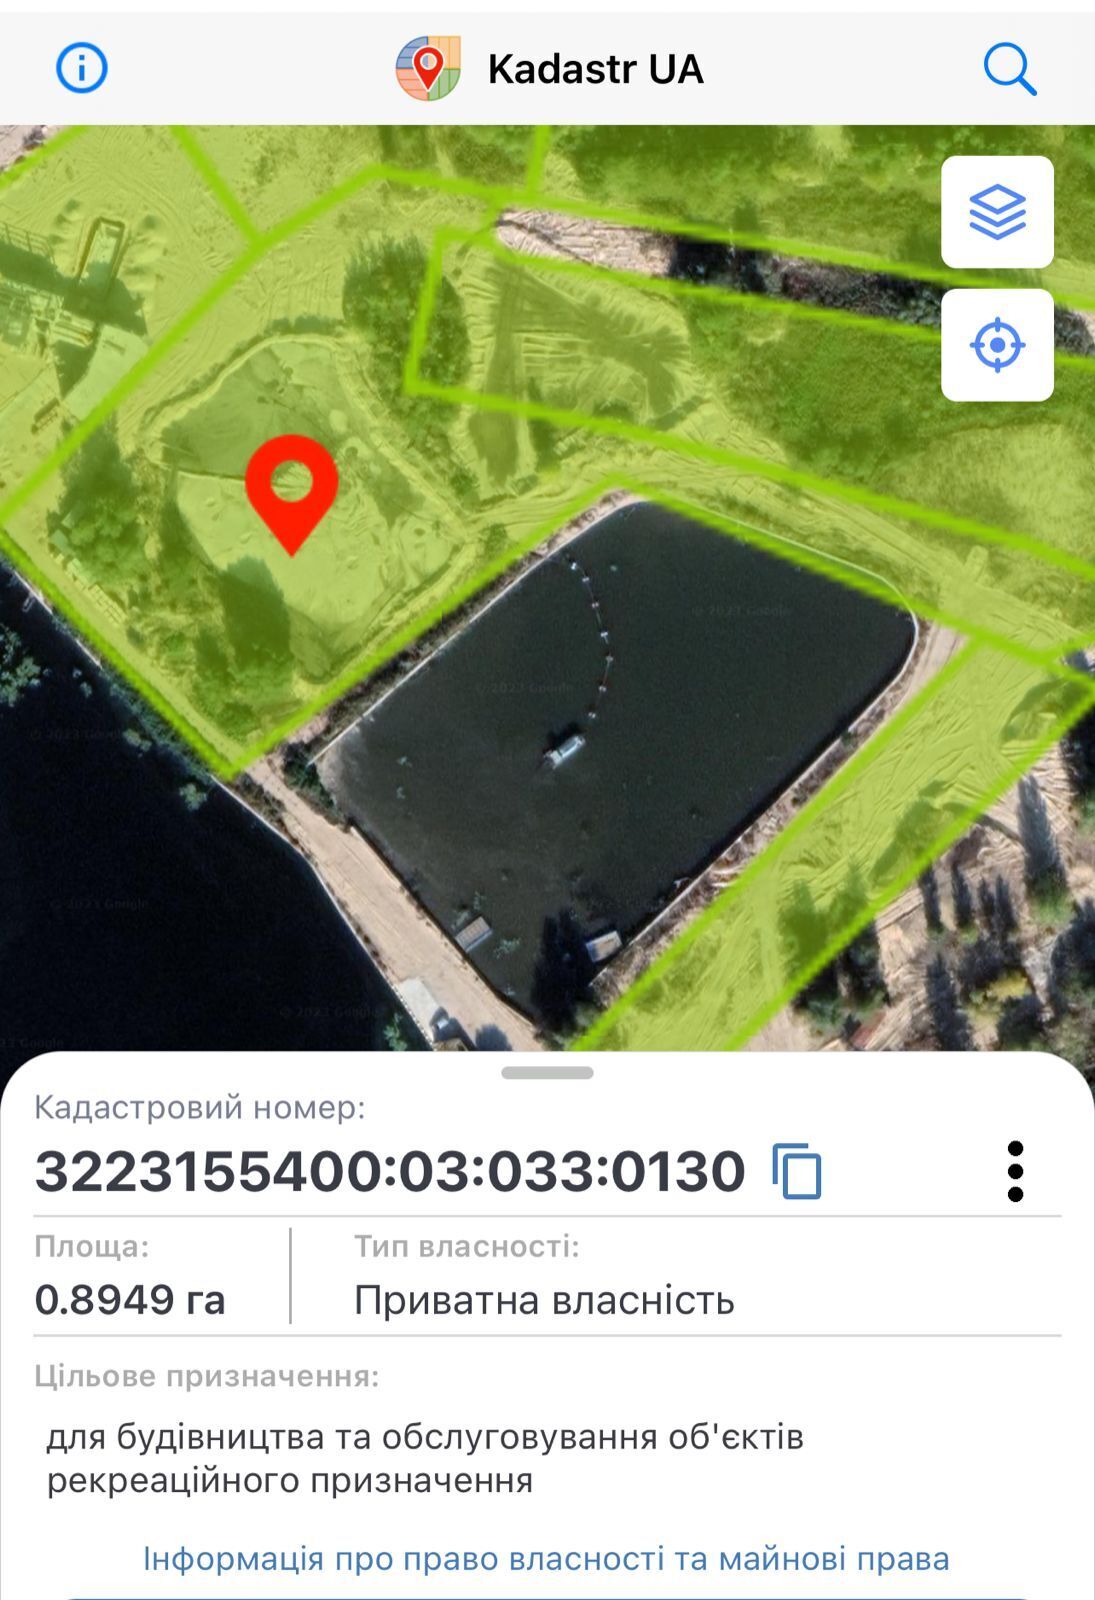 The plot, according to the cadastre, belongs to an individual